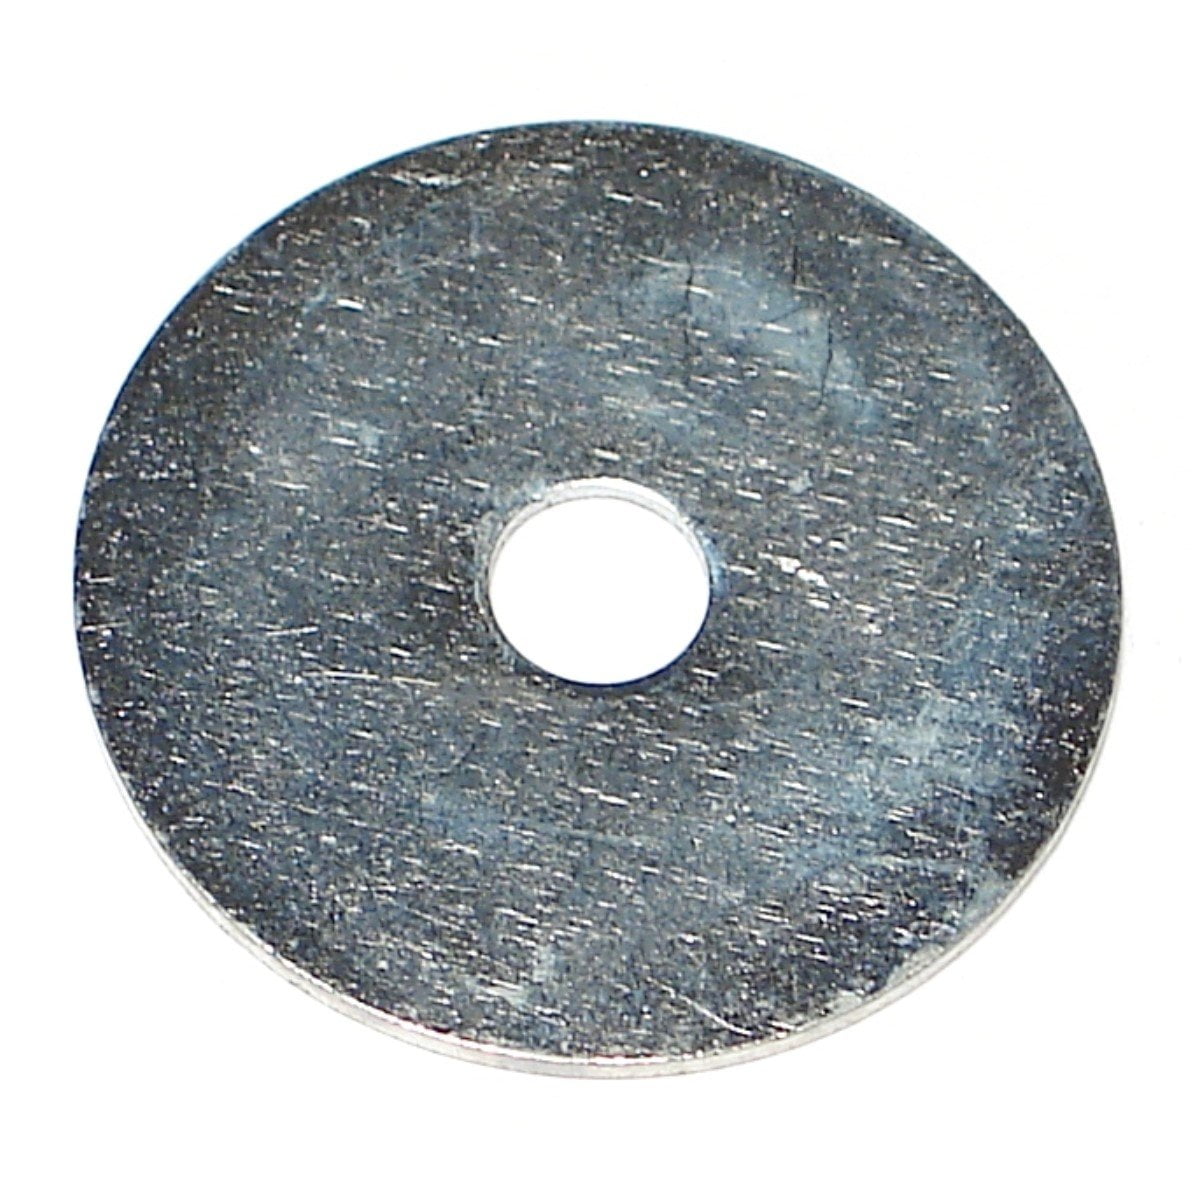 5 1/2x2 Thick Fender Washers 1/8" Thick Heavy Duty Smallest Package 